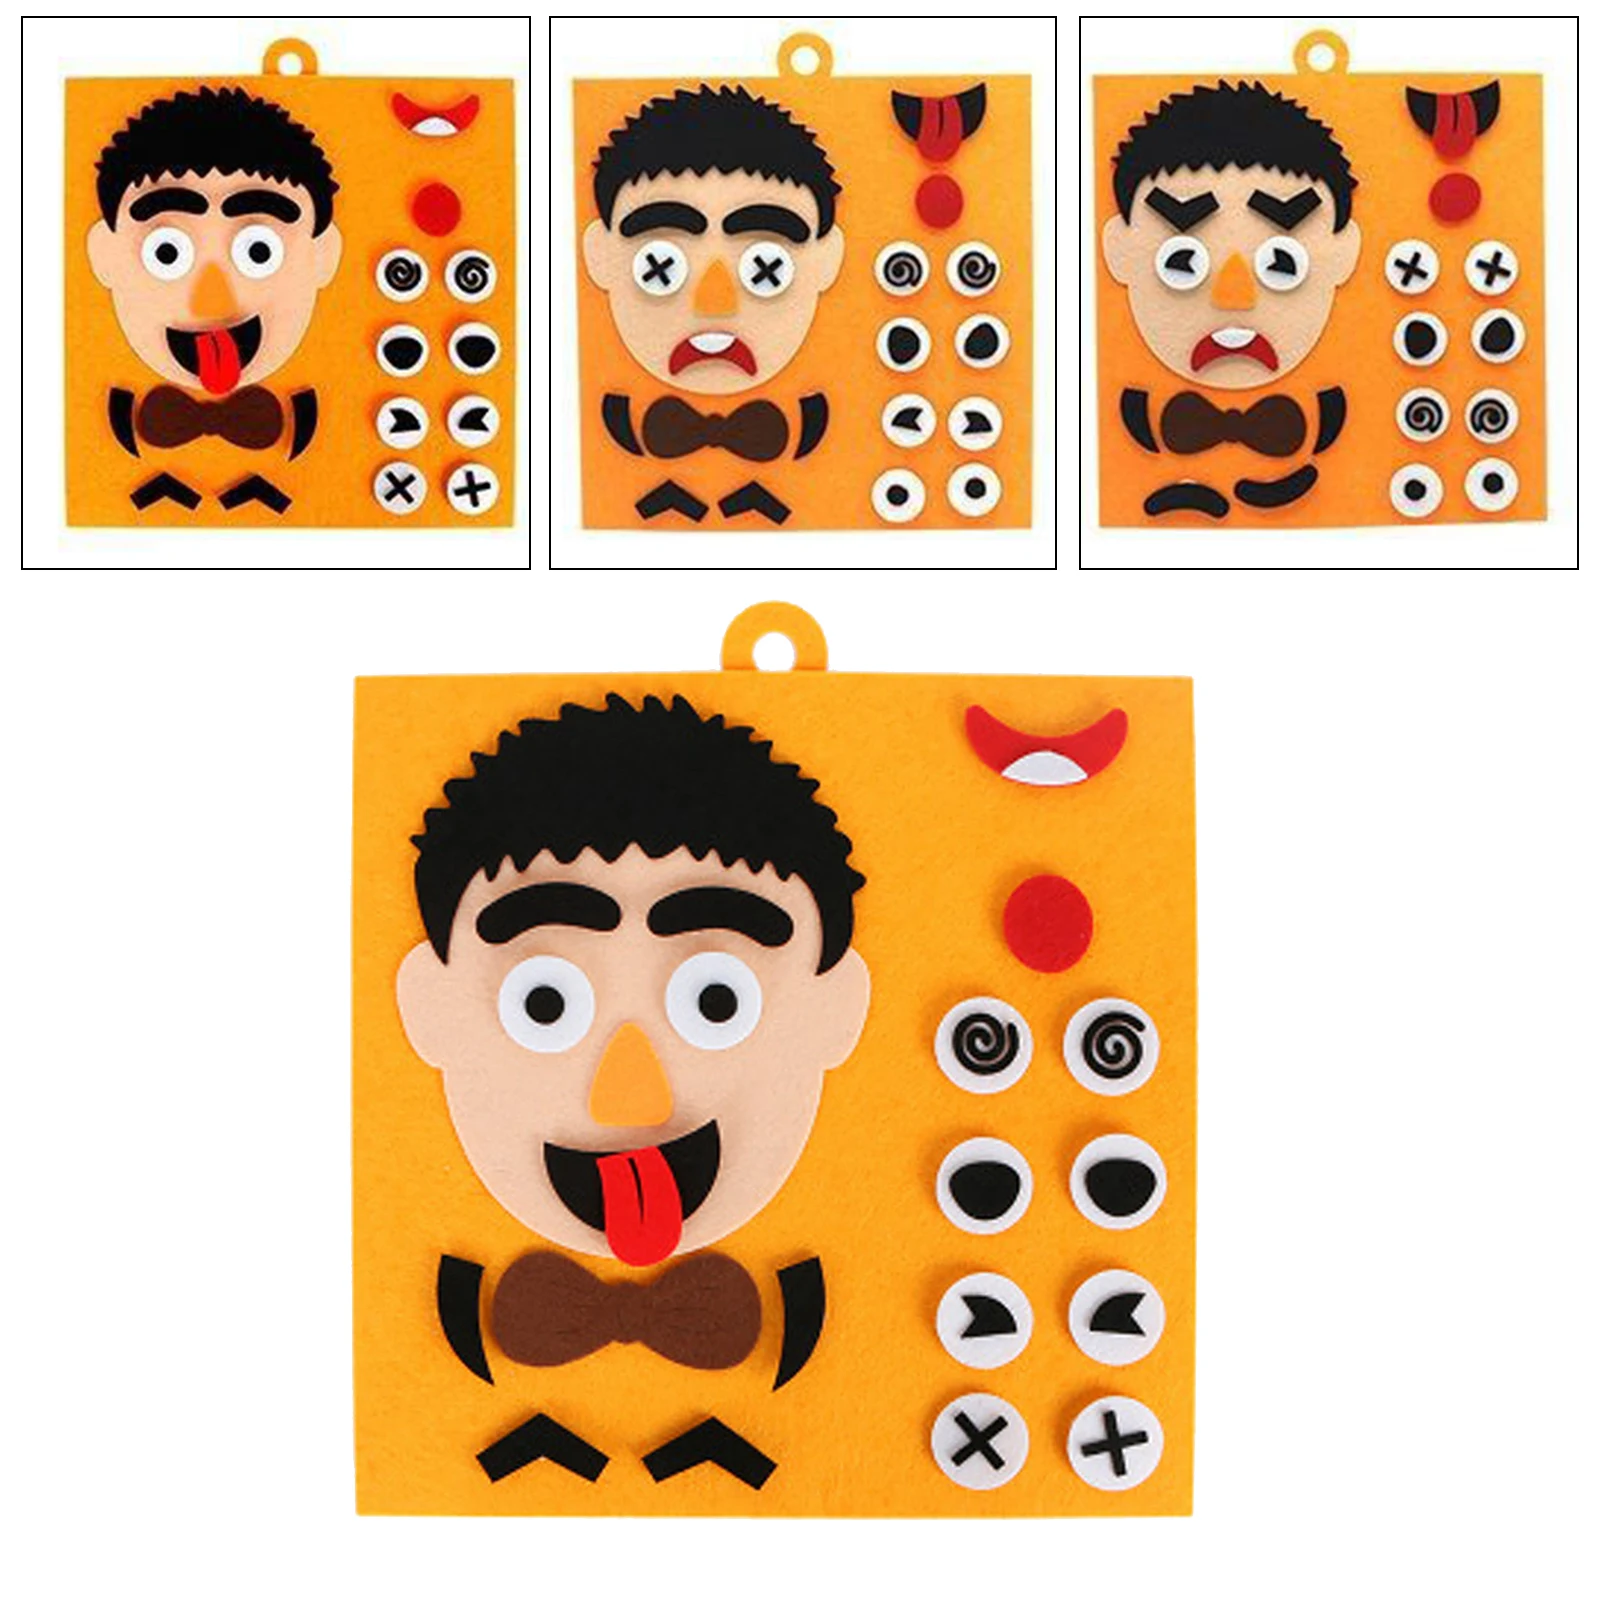 DIY Toys Emotion Change Puzzle Toys Creative Facial Expressions Face Changing Puzzle Toy Improve Hands-on Ability Toy for Kids